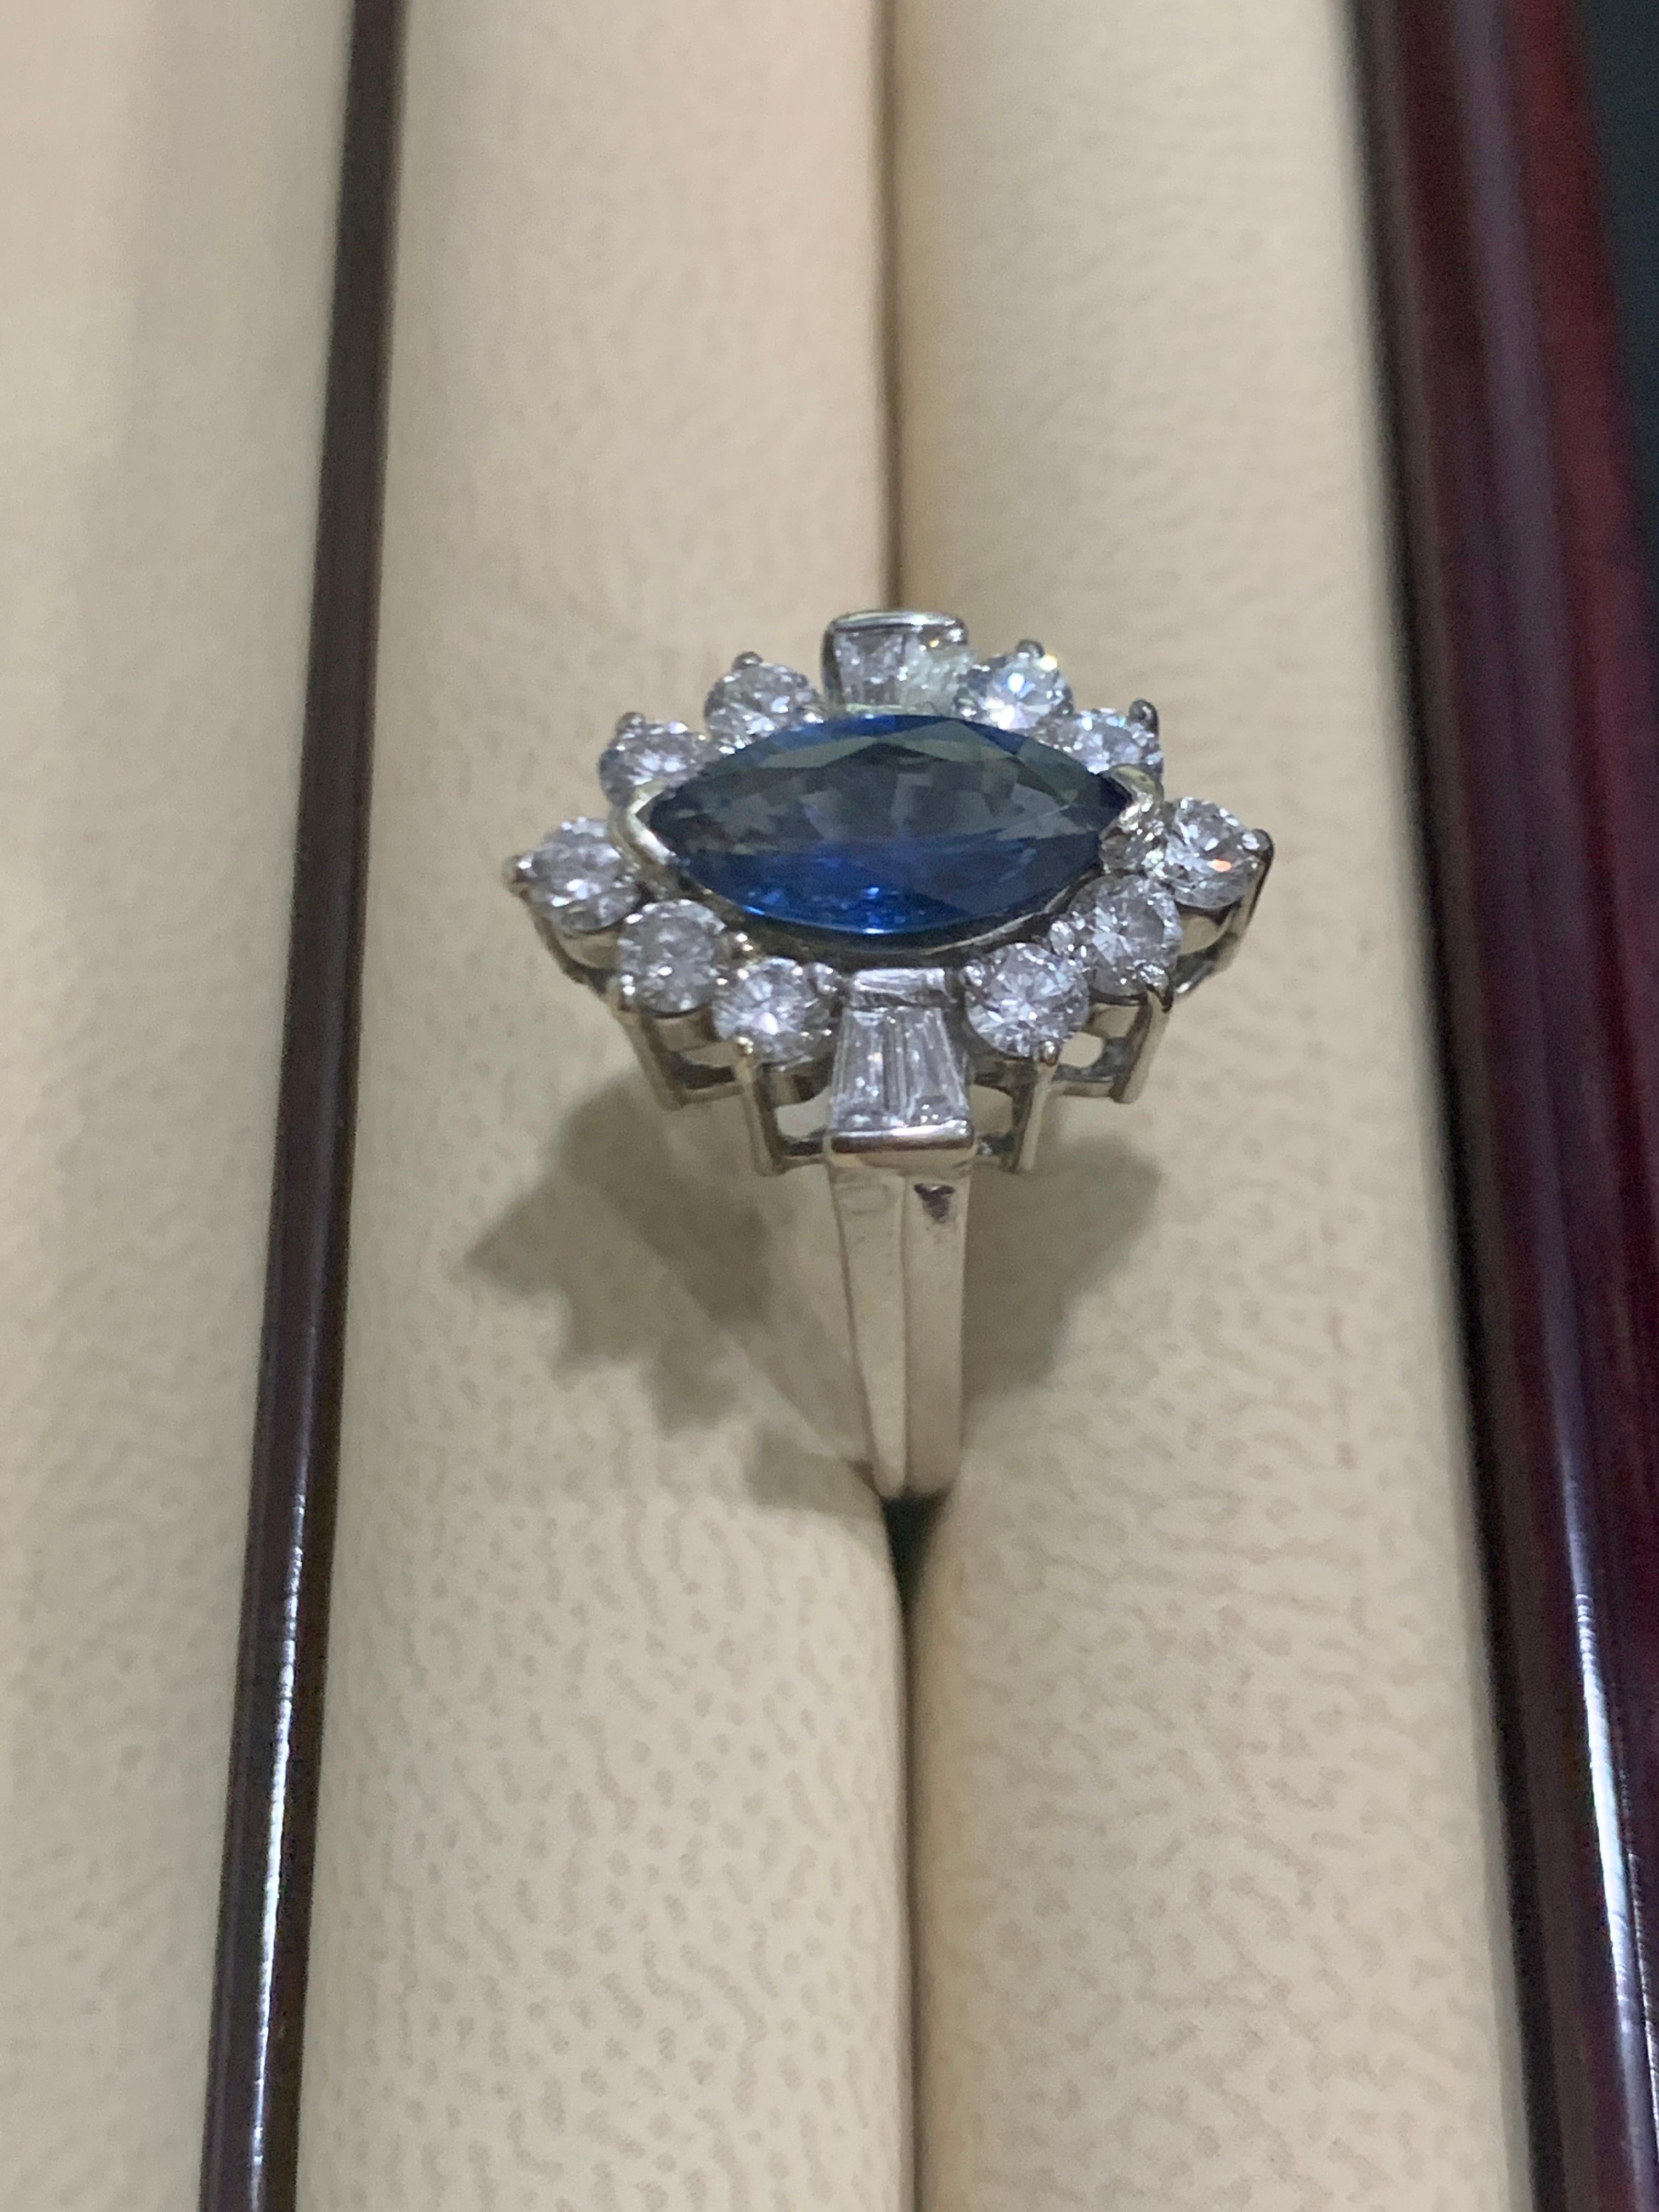 Marquise Cut 2.5 Ct Blue Sapphire & 1.2Ct Diamond Cocktail Ring in 18 Karat White Gold Estate For Sale